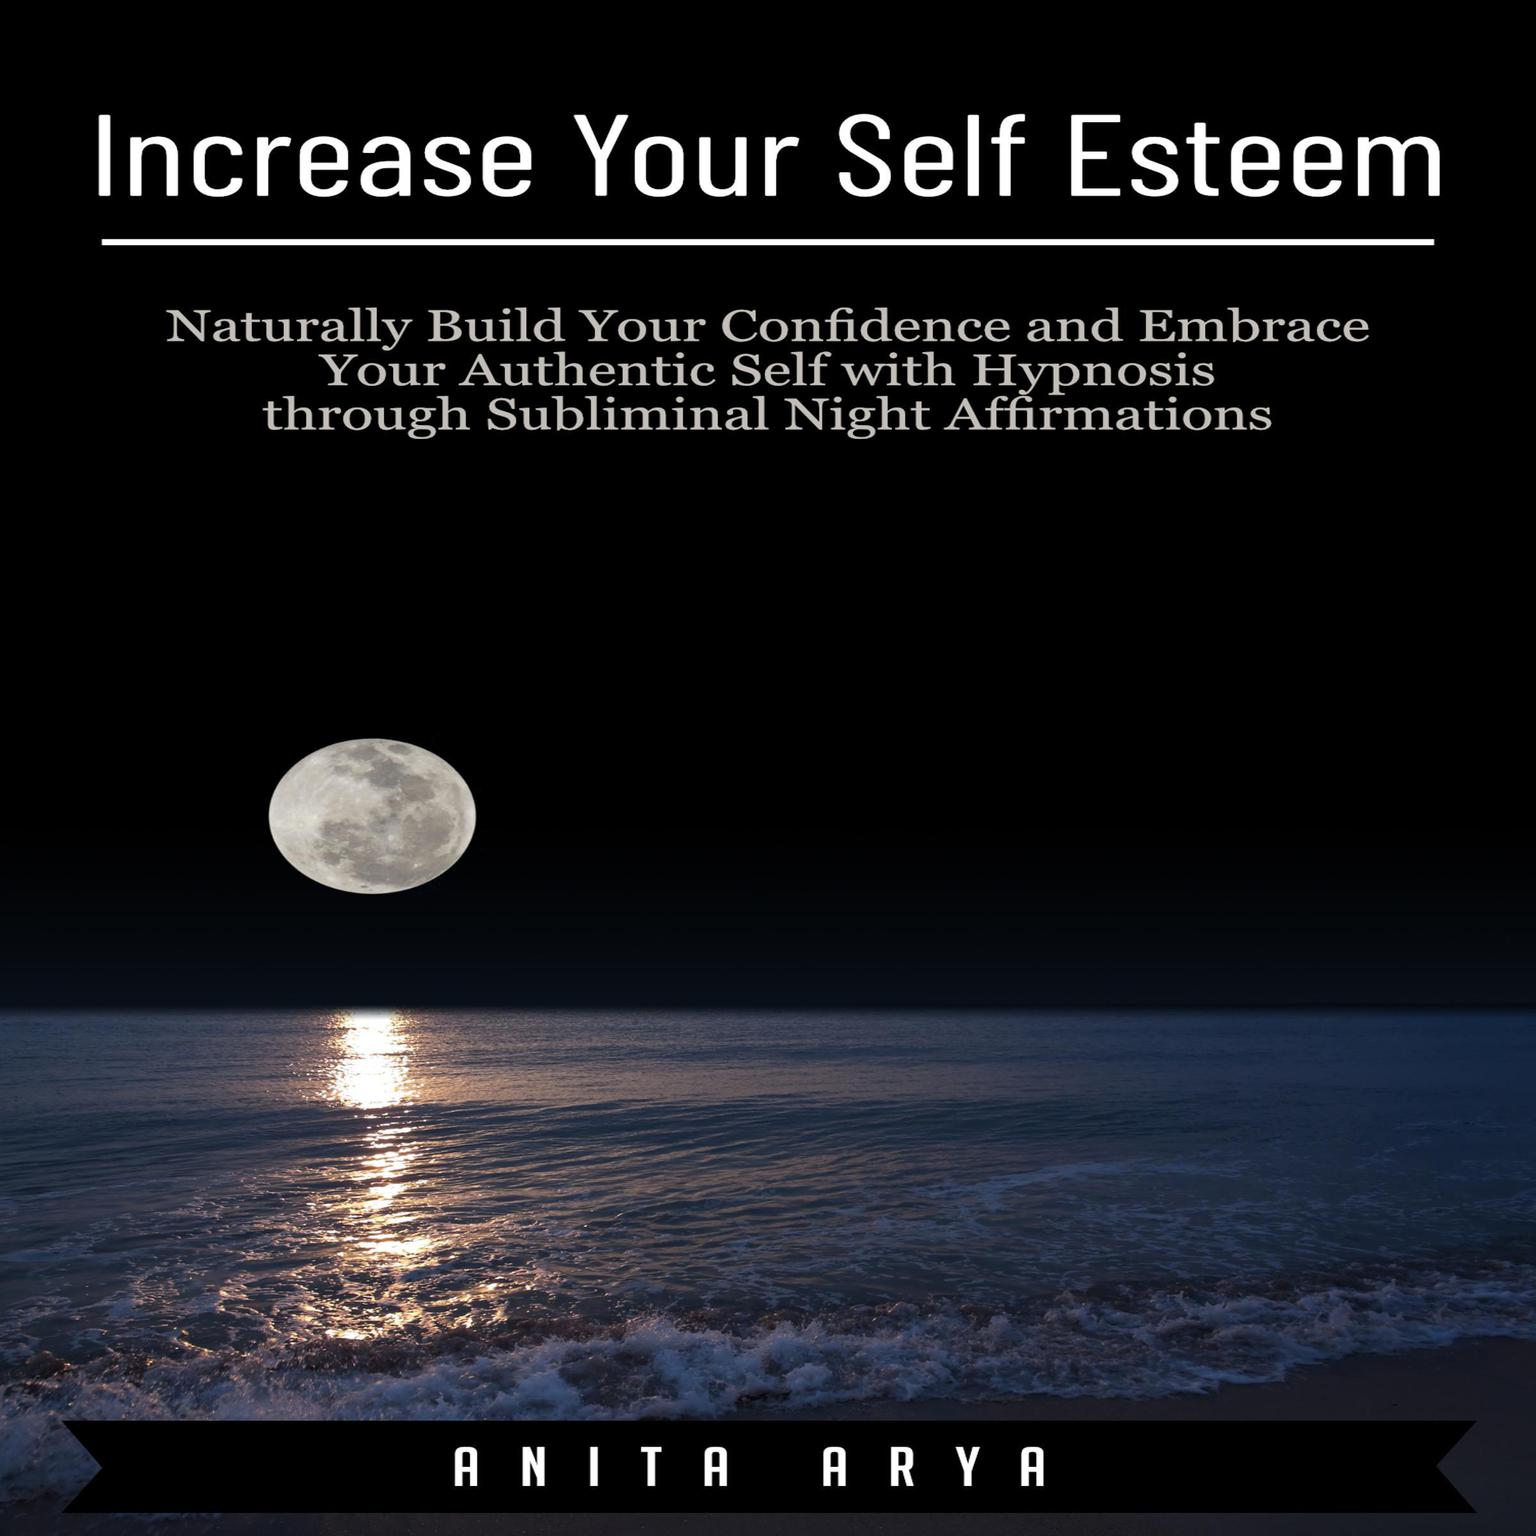 Increase Your Self Esteem: Naturally Build Your Confidence and Embrace Your Authentic Self with Hypnosis through Subliminal Night Affirmations Audiobook, by Anita Arya  